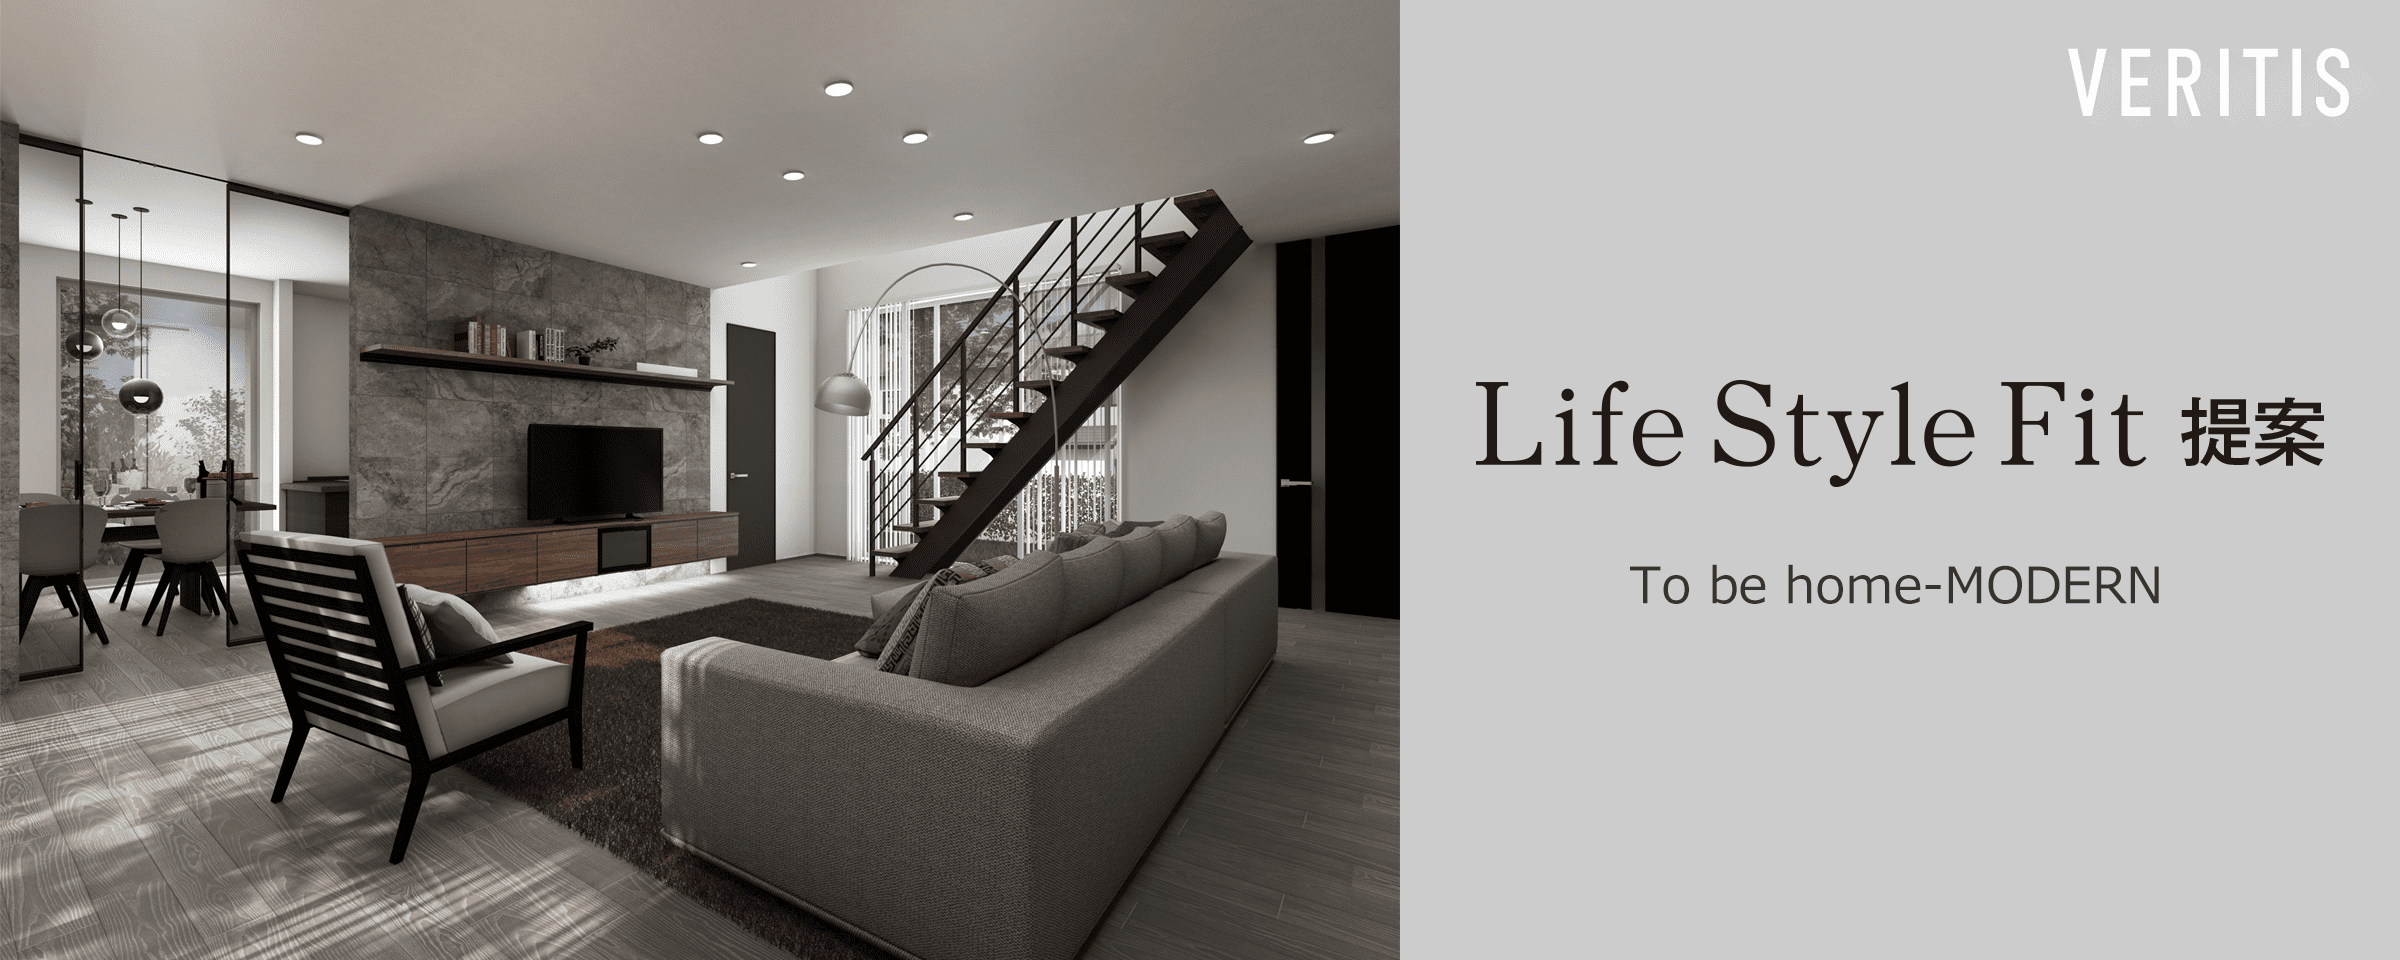 Life style Fit 提案 To be home-MODERN